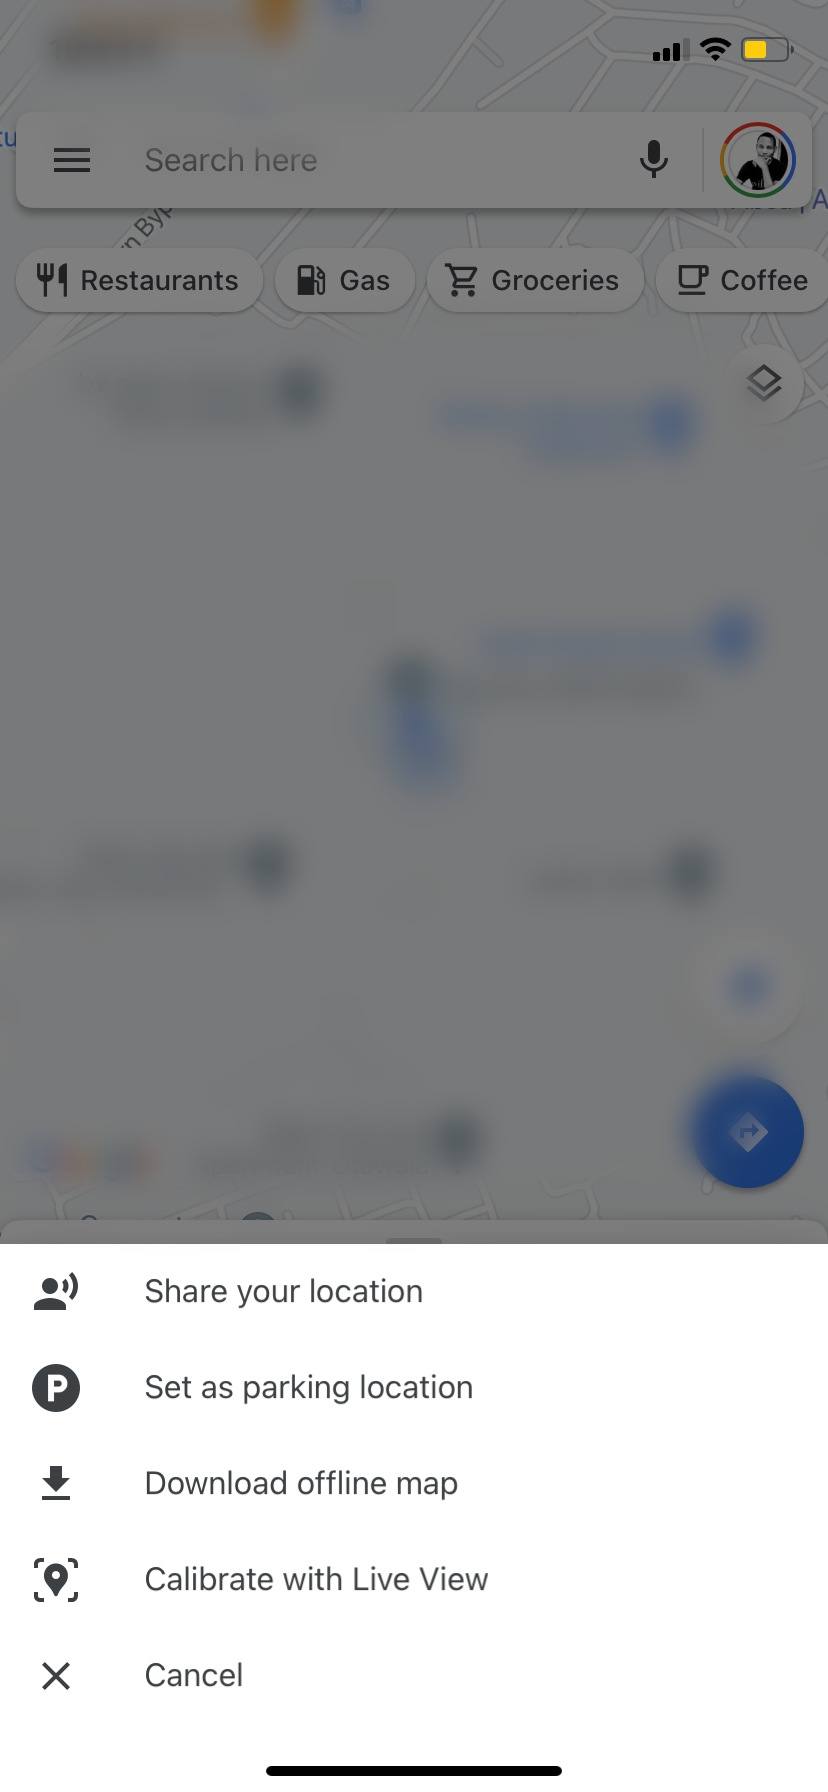 Share location option in Google Maps